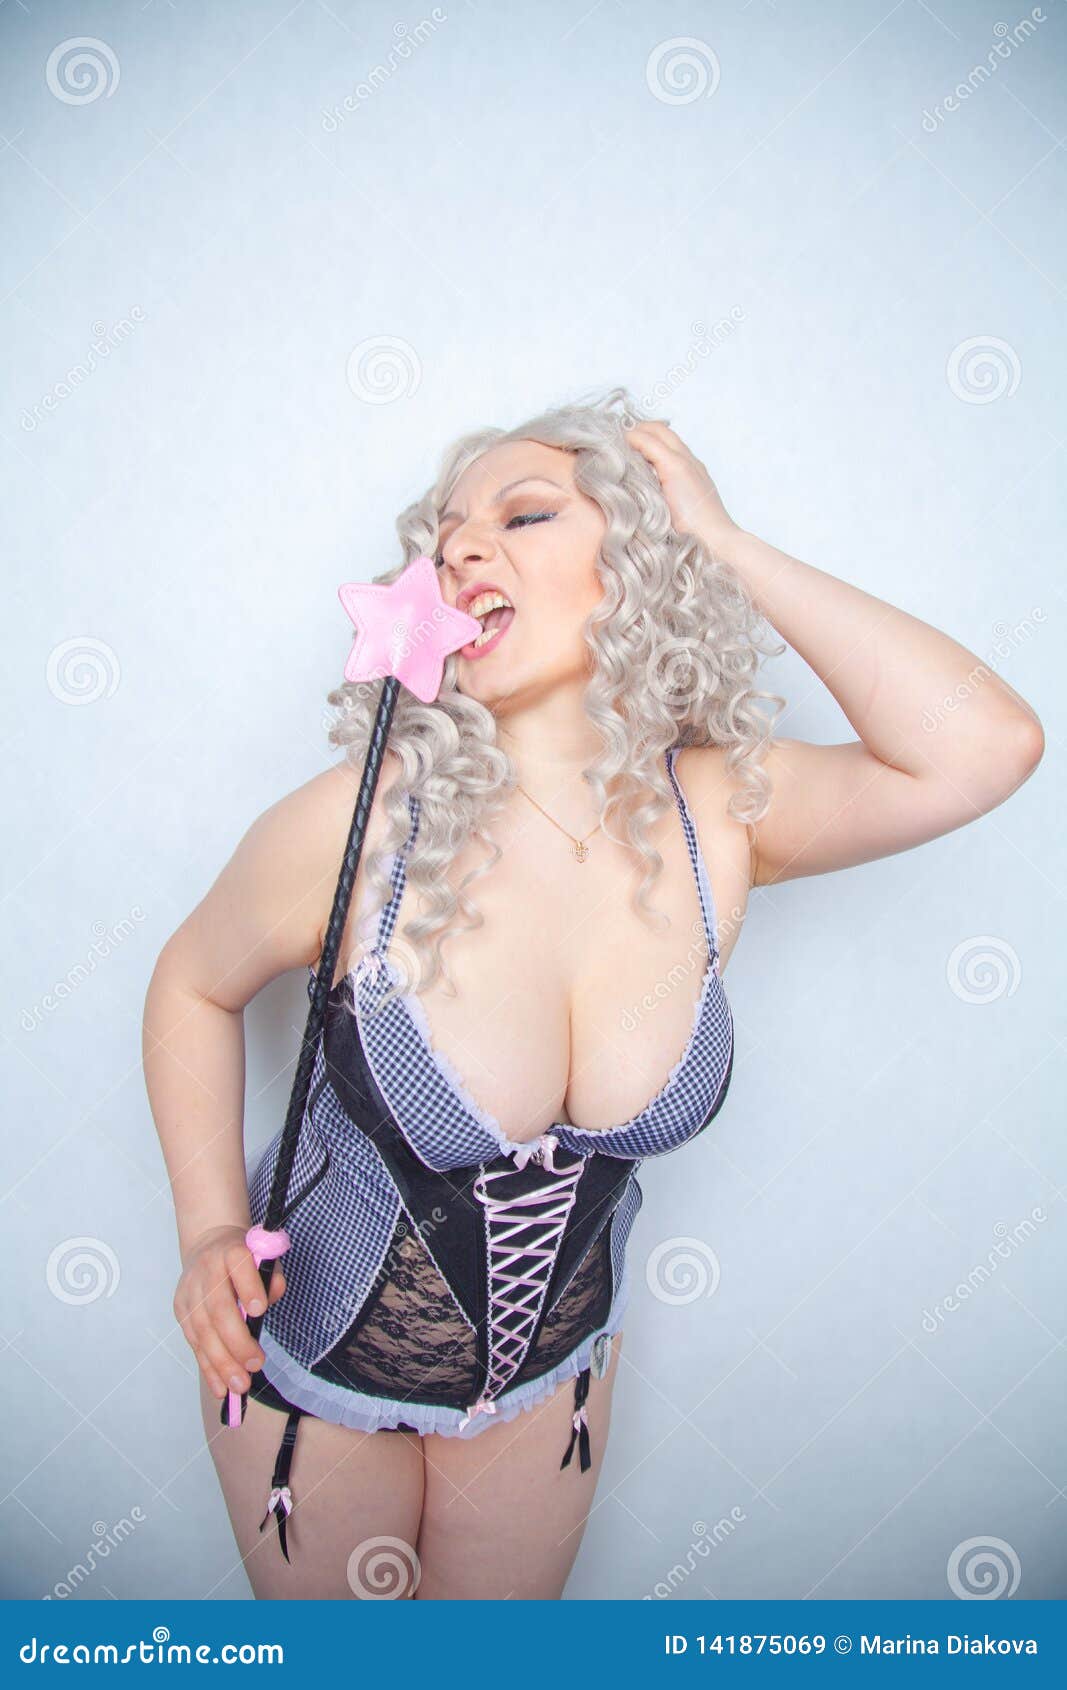 Caucasian Curvy Girl in Erotic Lingerie with Leather Bdsm Riding Crop Standing As Advanced Vanilla Person Ready for Kinky Sex on W Stock Image pic